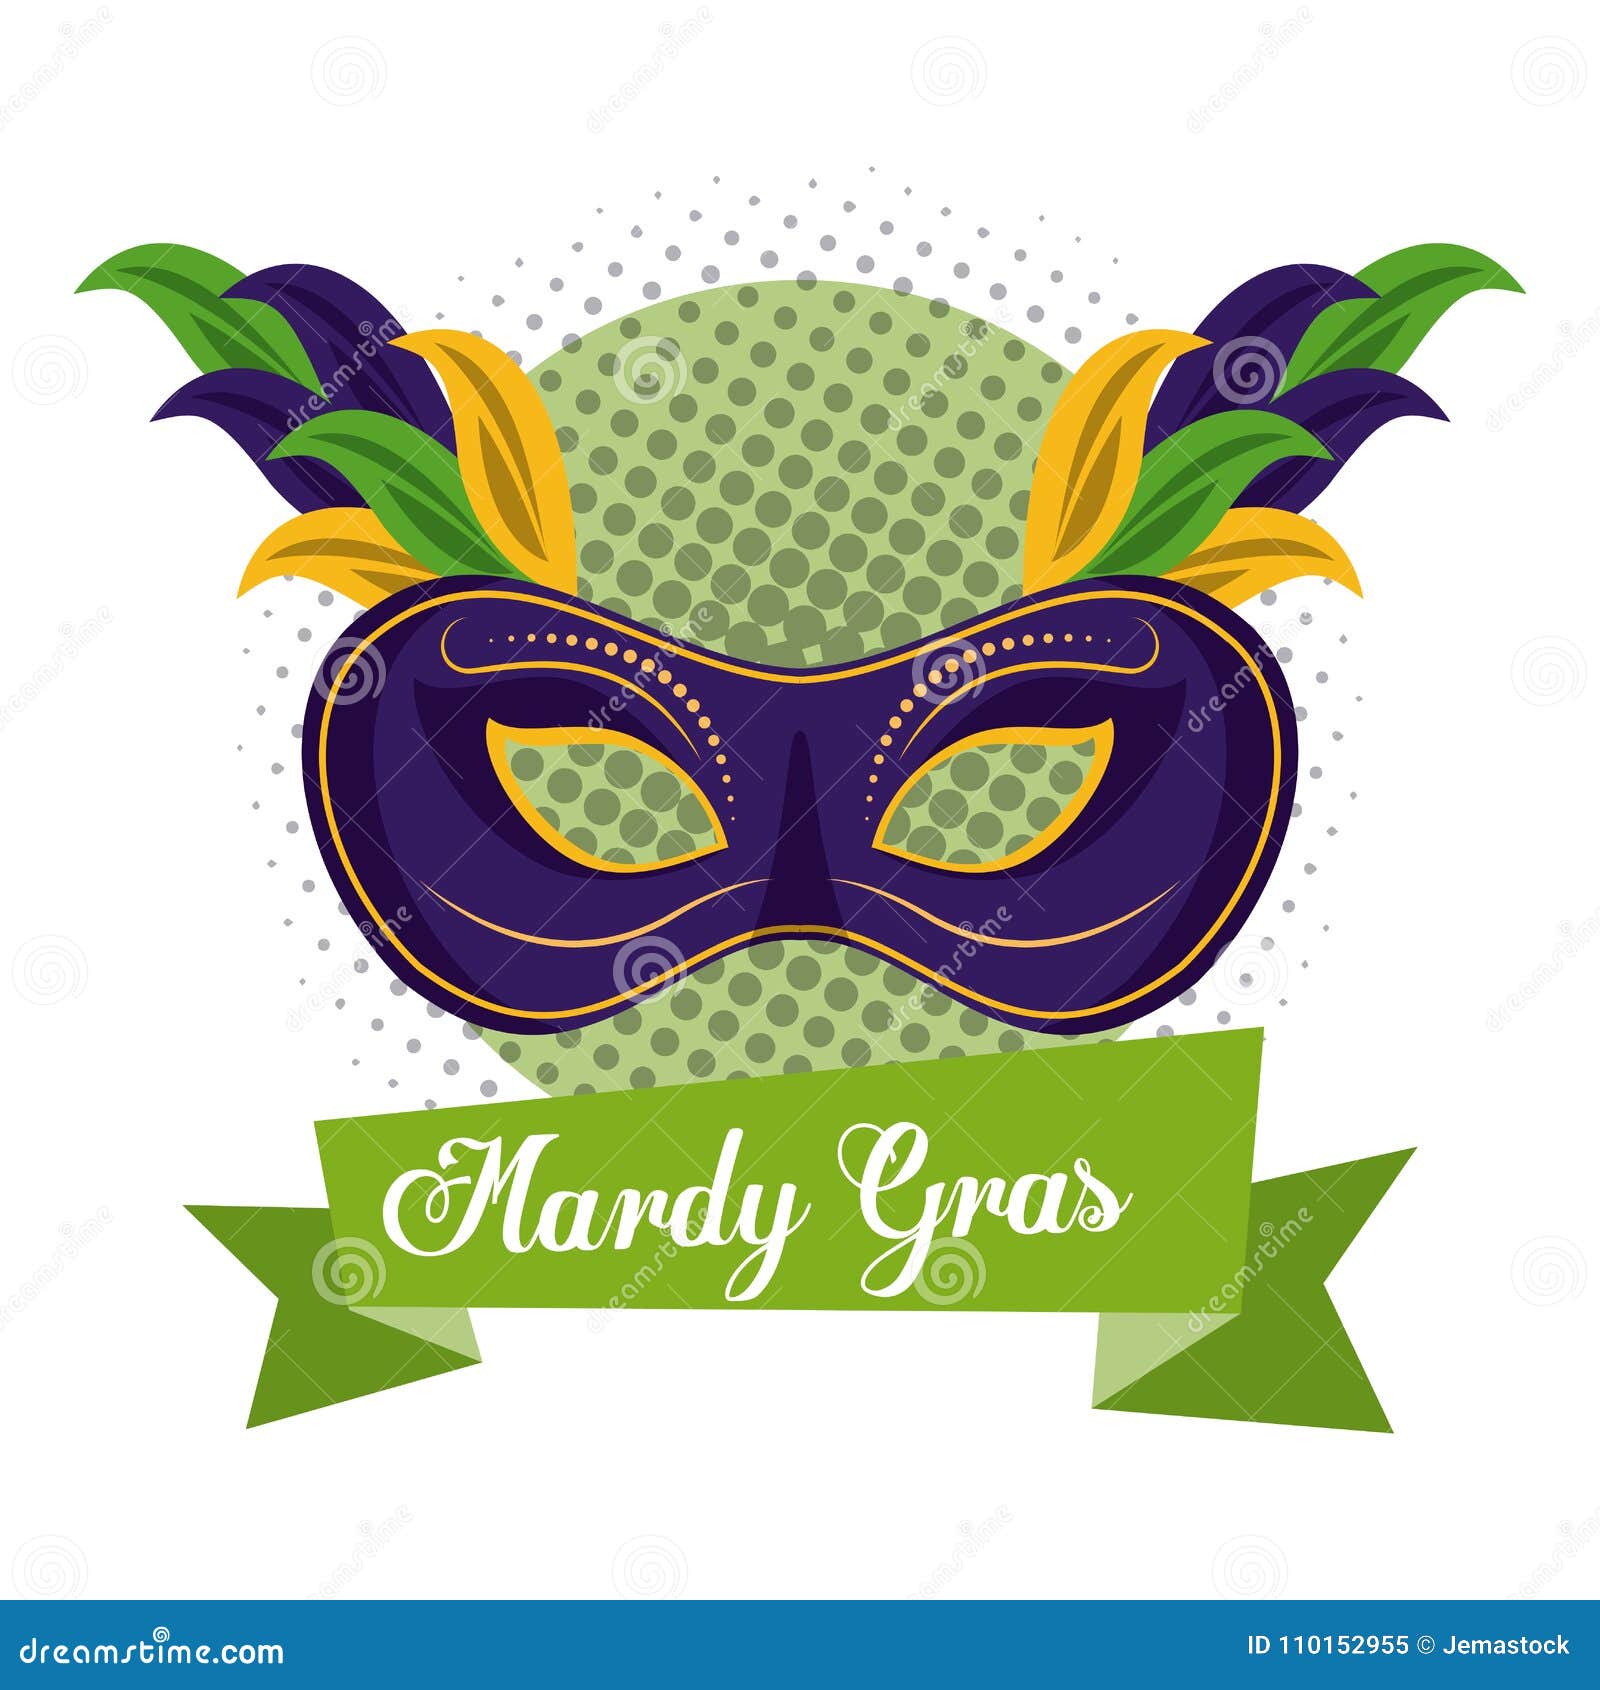 Mardi Gras Feathers Vector Art, Icons, and Graphics for Free Download